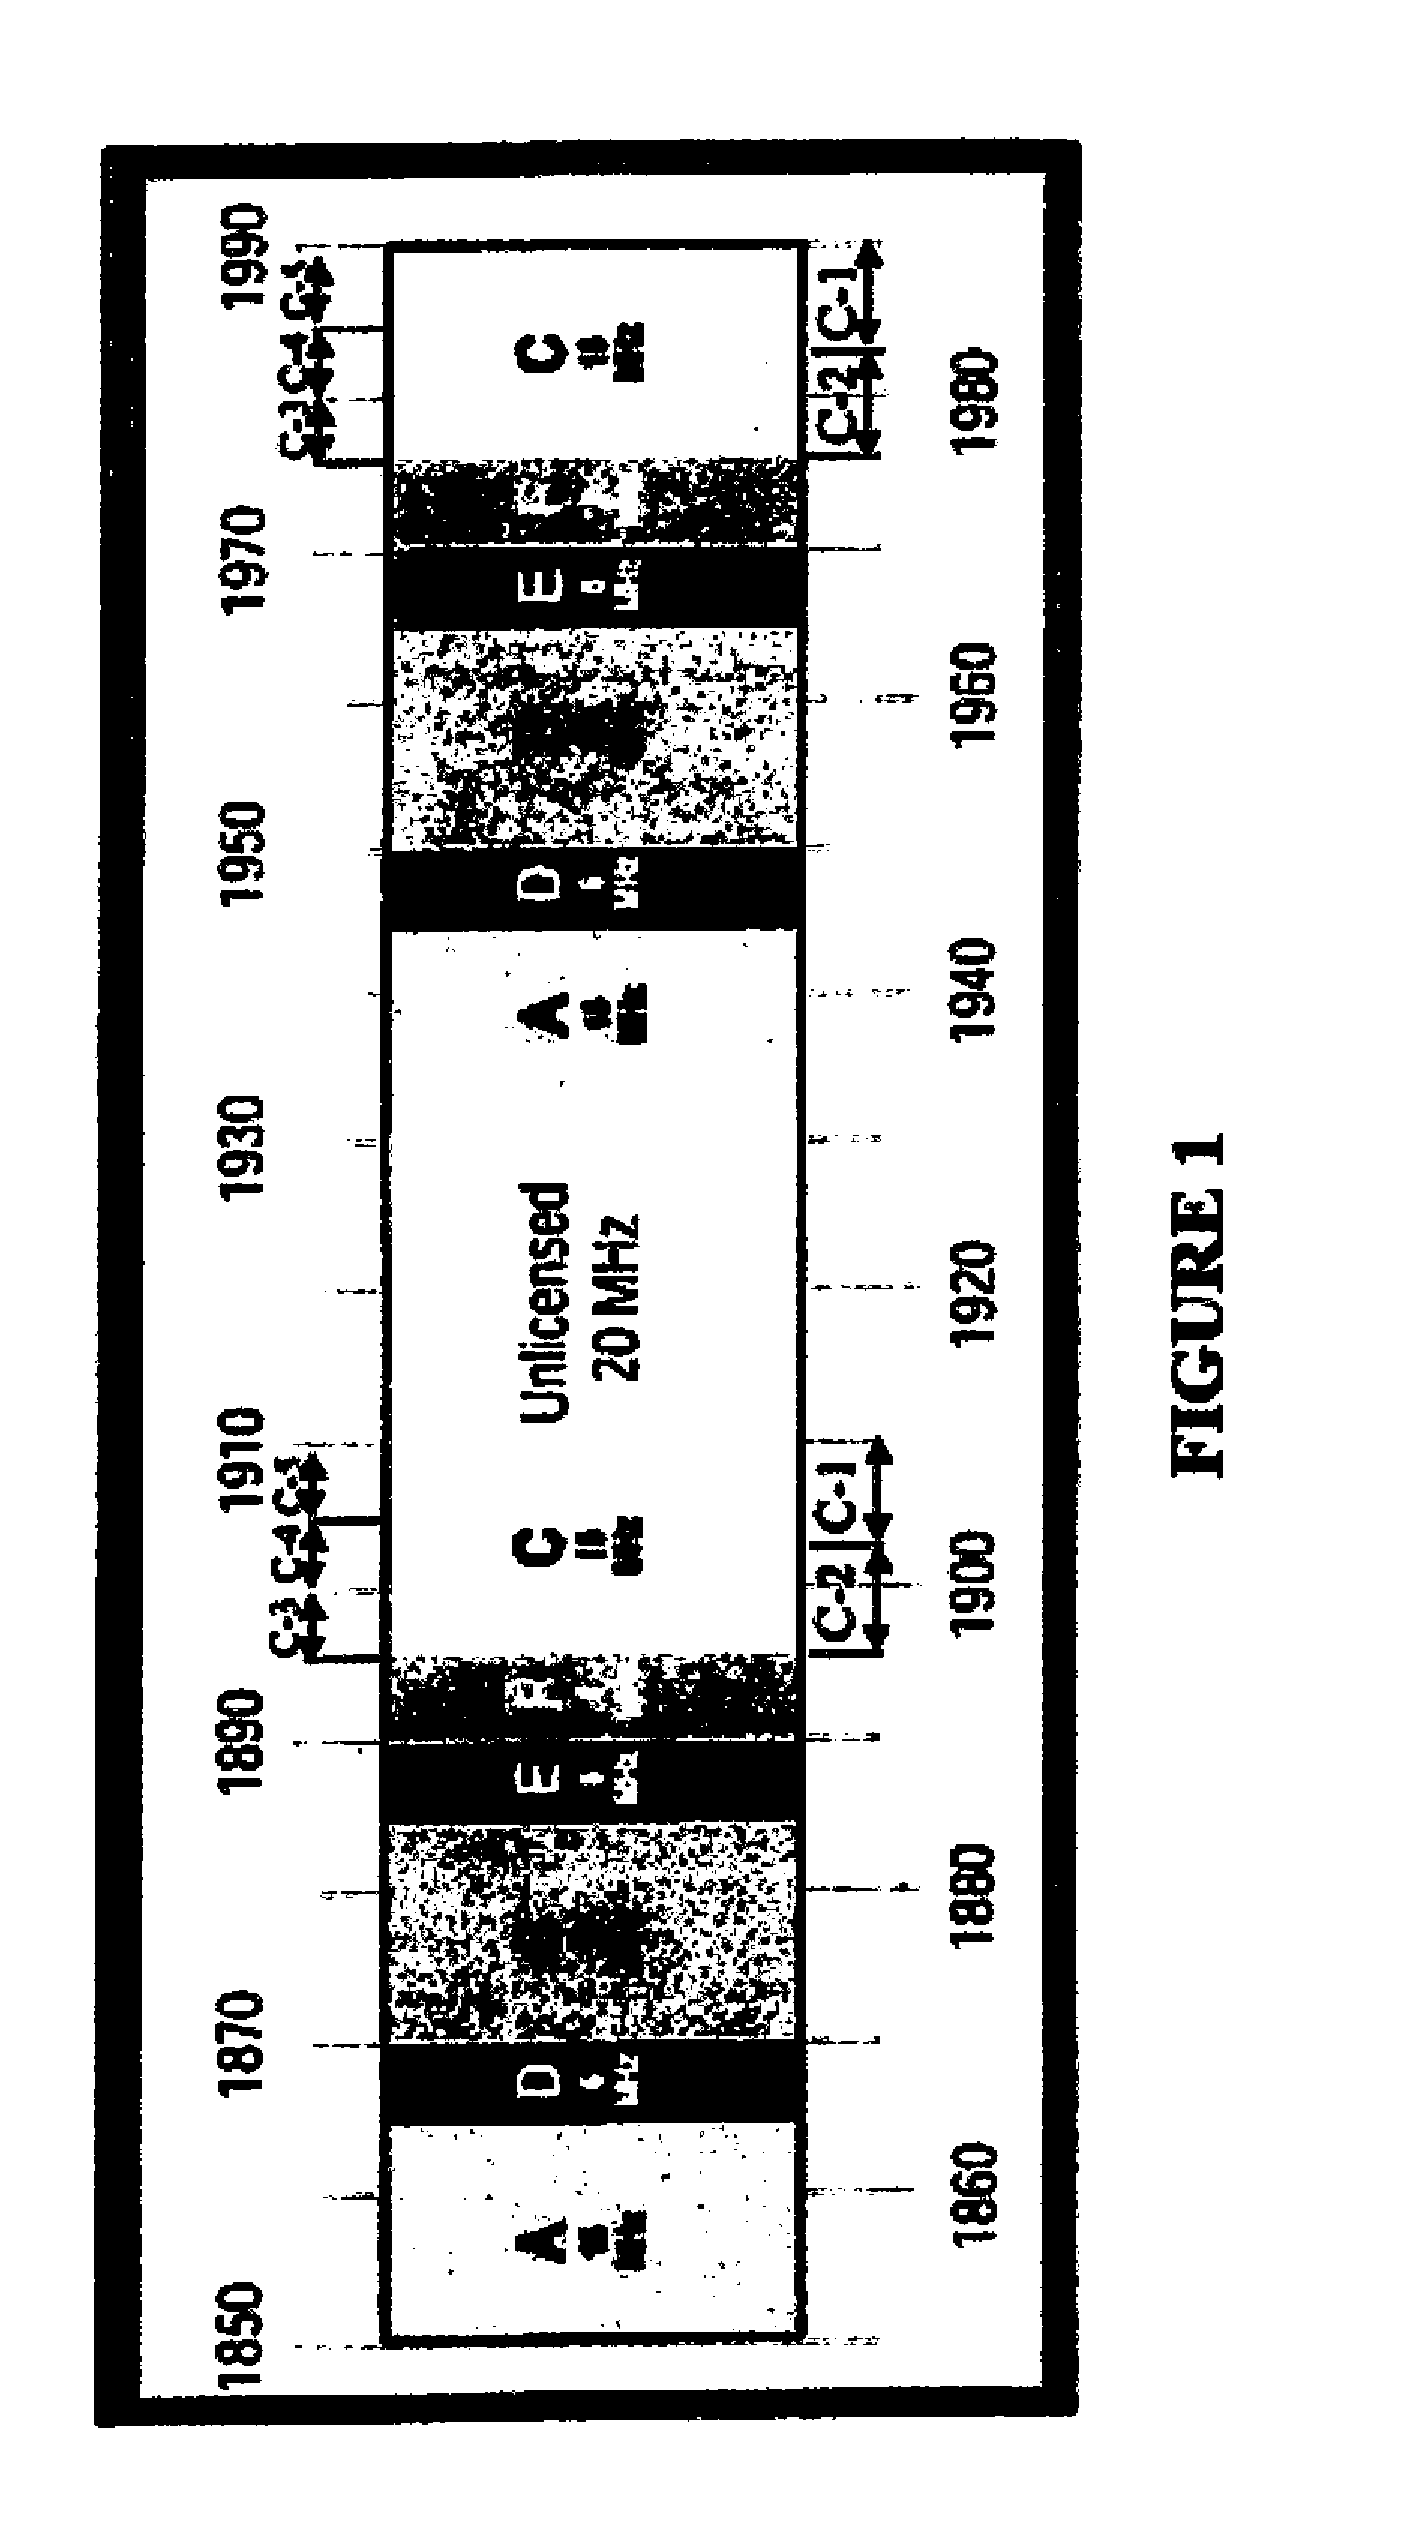 Method and system for reconfiguring private cellular networks for resolving frequency band conflicts with official government communication networks